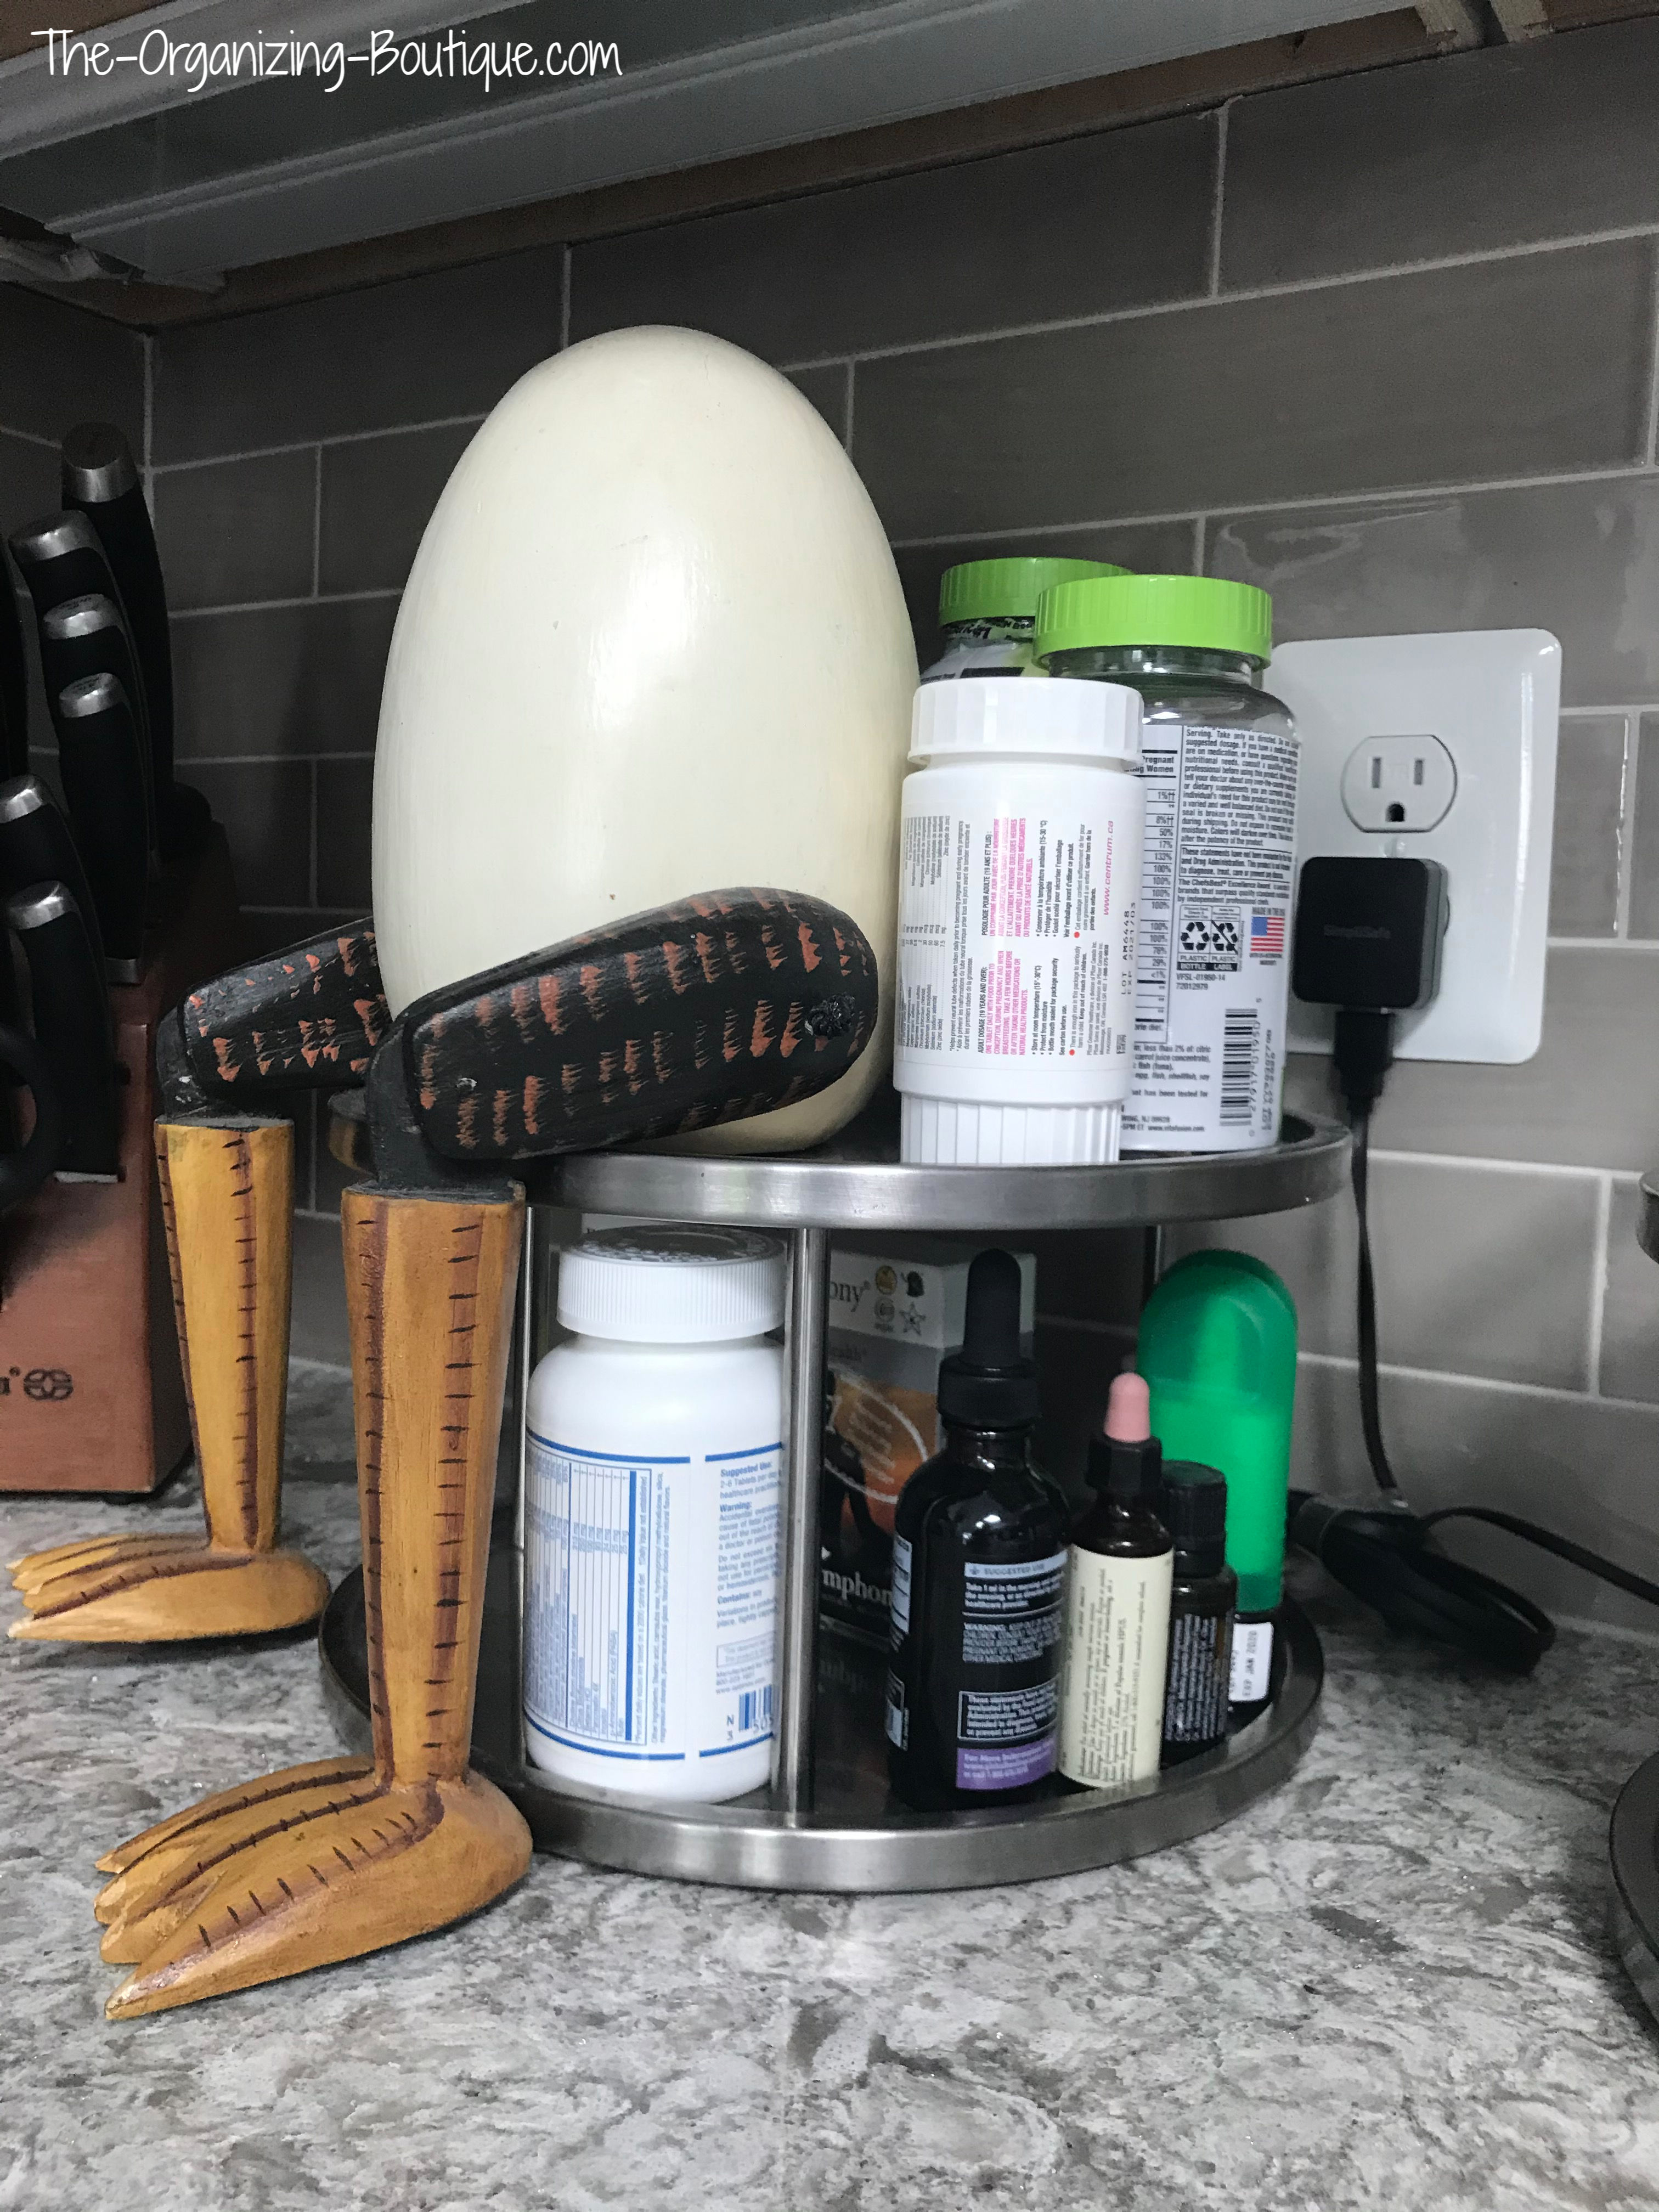 Vitamin and Supplement Storage Recommendations